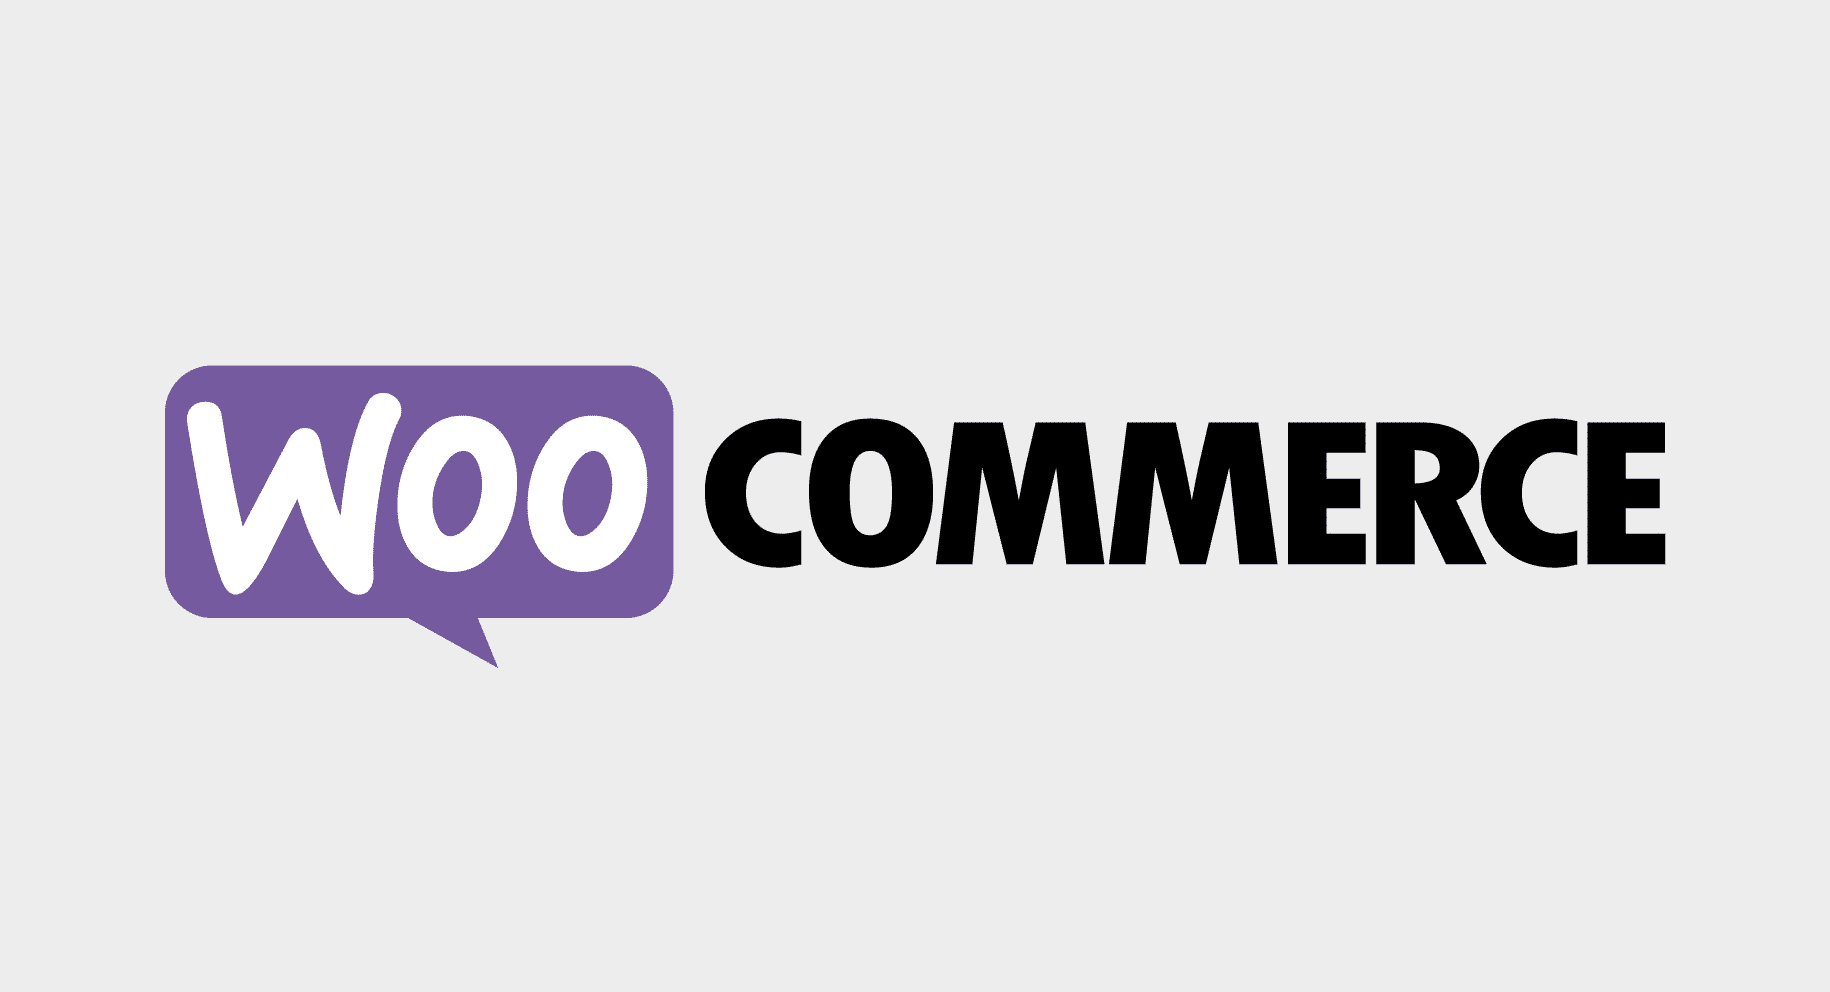 woocommerce-aims-to-produce-mvp-of-custom-tables-for-orders-by-q3-2022 WooCommerce 的目标是到 2022 年第三季度为订单生产自定义表格的 MVP